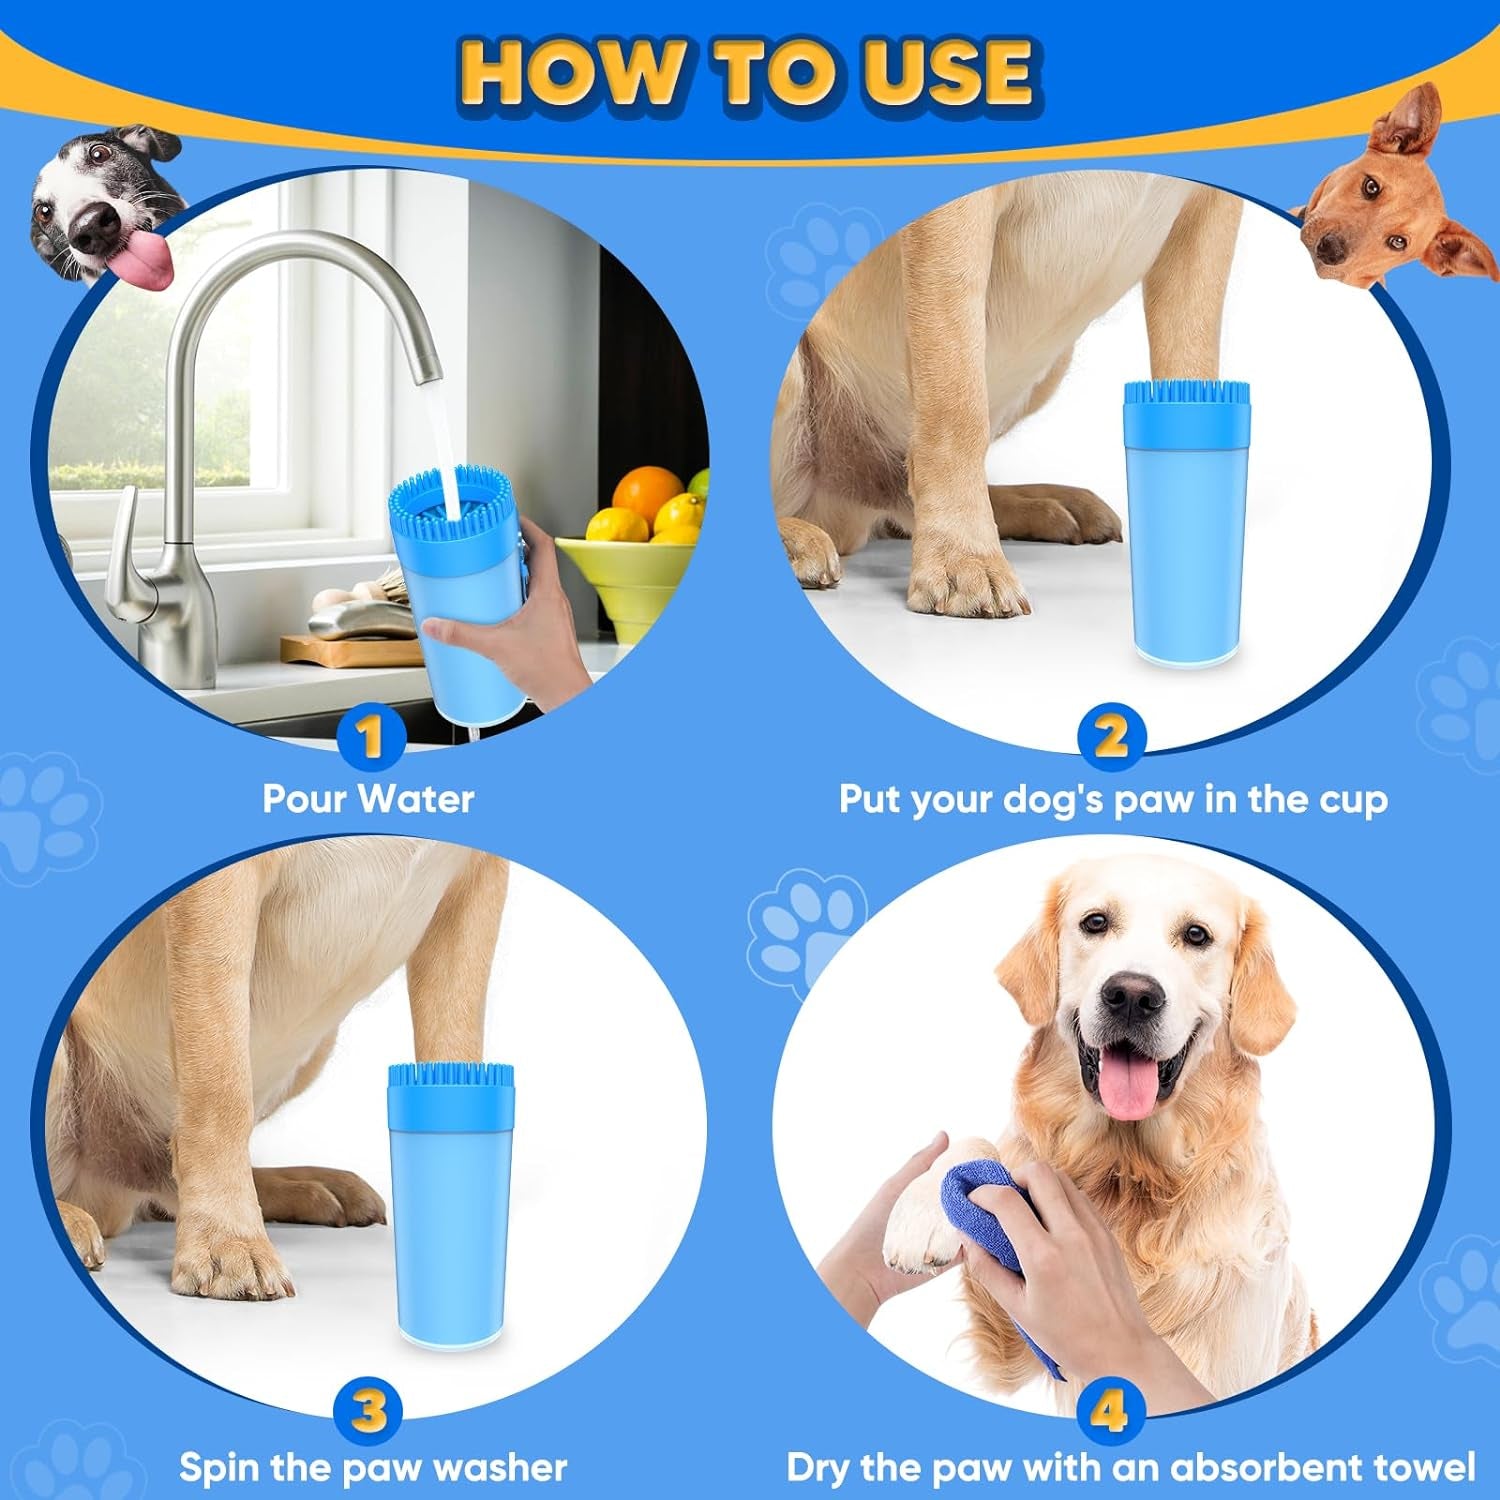 Dog Paw Cleaner,Upgrade 2 in 1 Portable Dog Paw Washer,Buddy Muddy Pet Foot Cleaner for Medium Large Breed Dogs Cats (With Absorbent Towel)